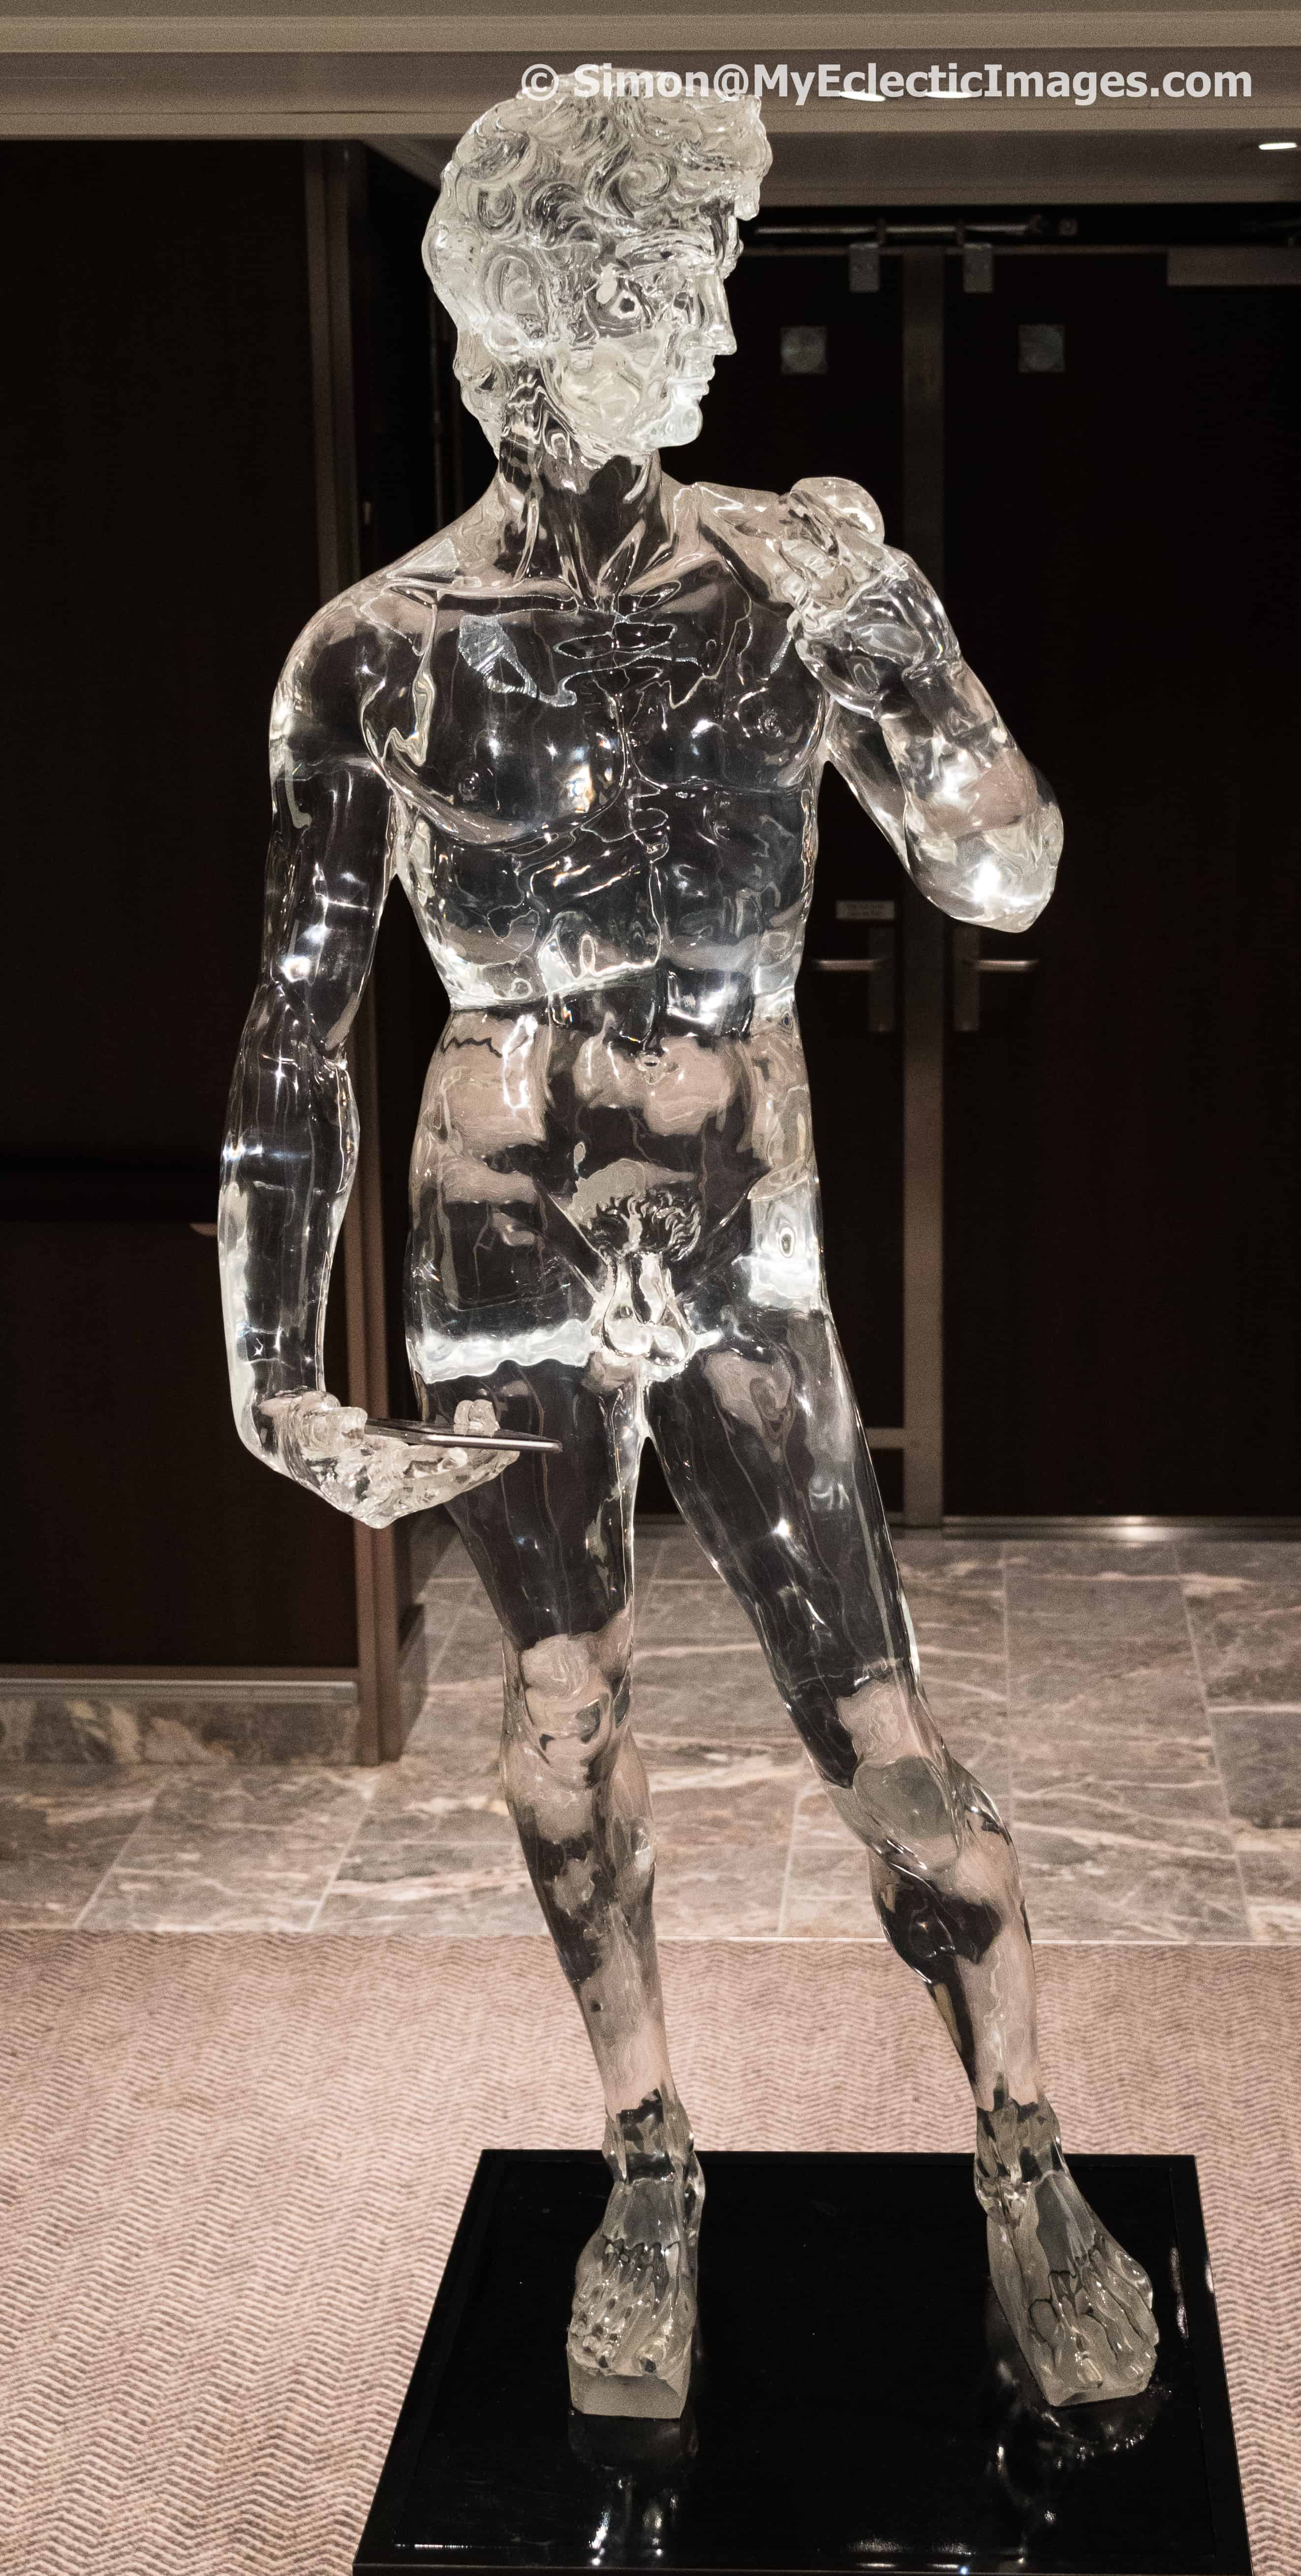 A Modern Take on Michelangelo’s David Complete with Smartphone